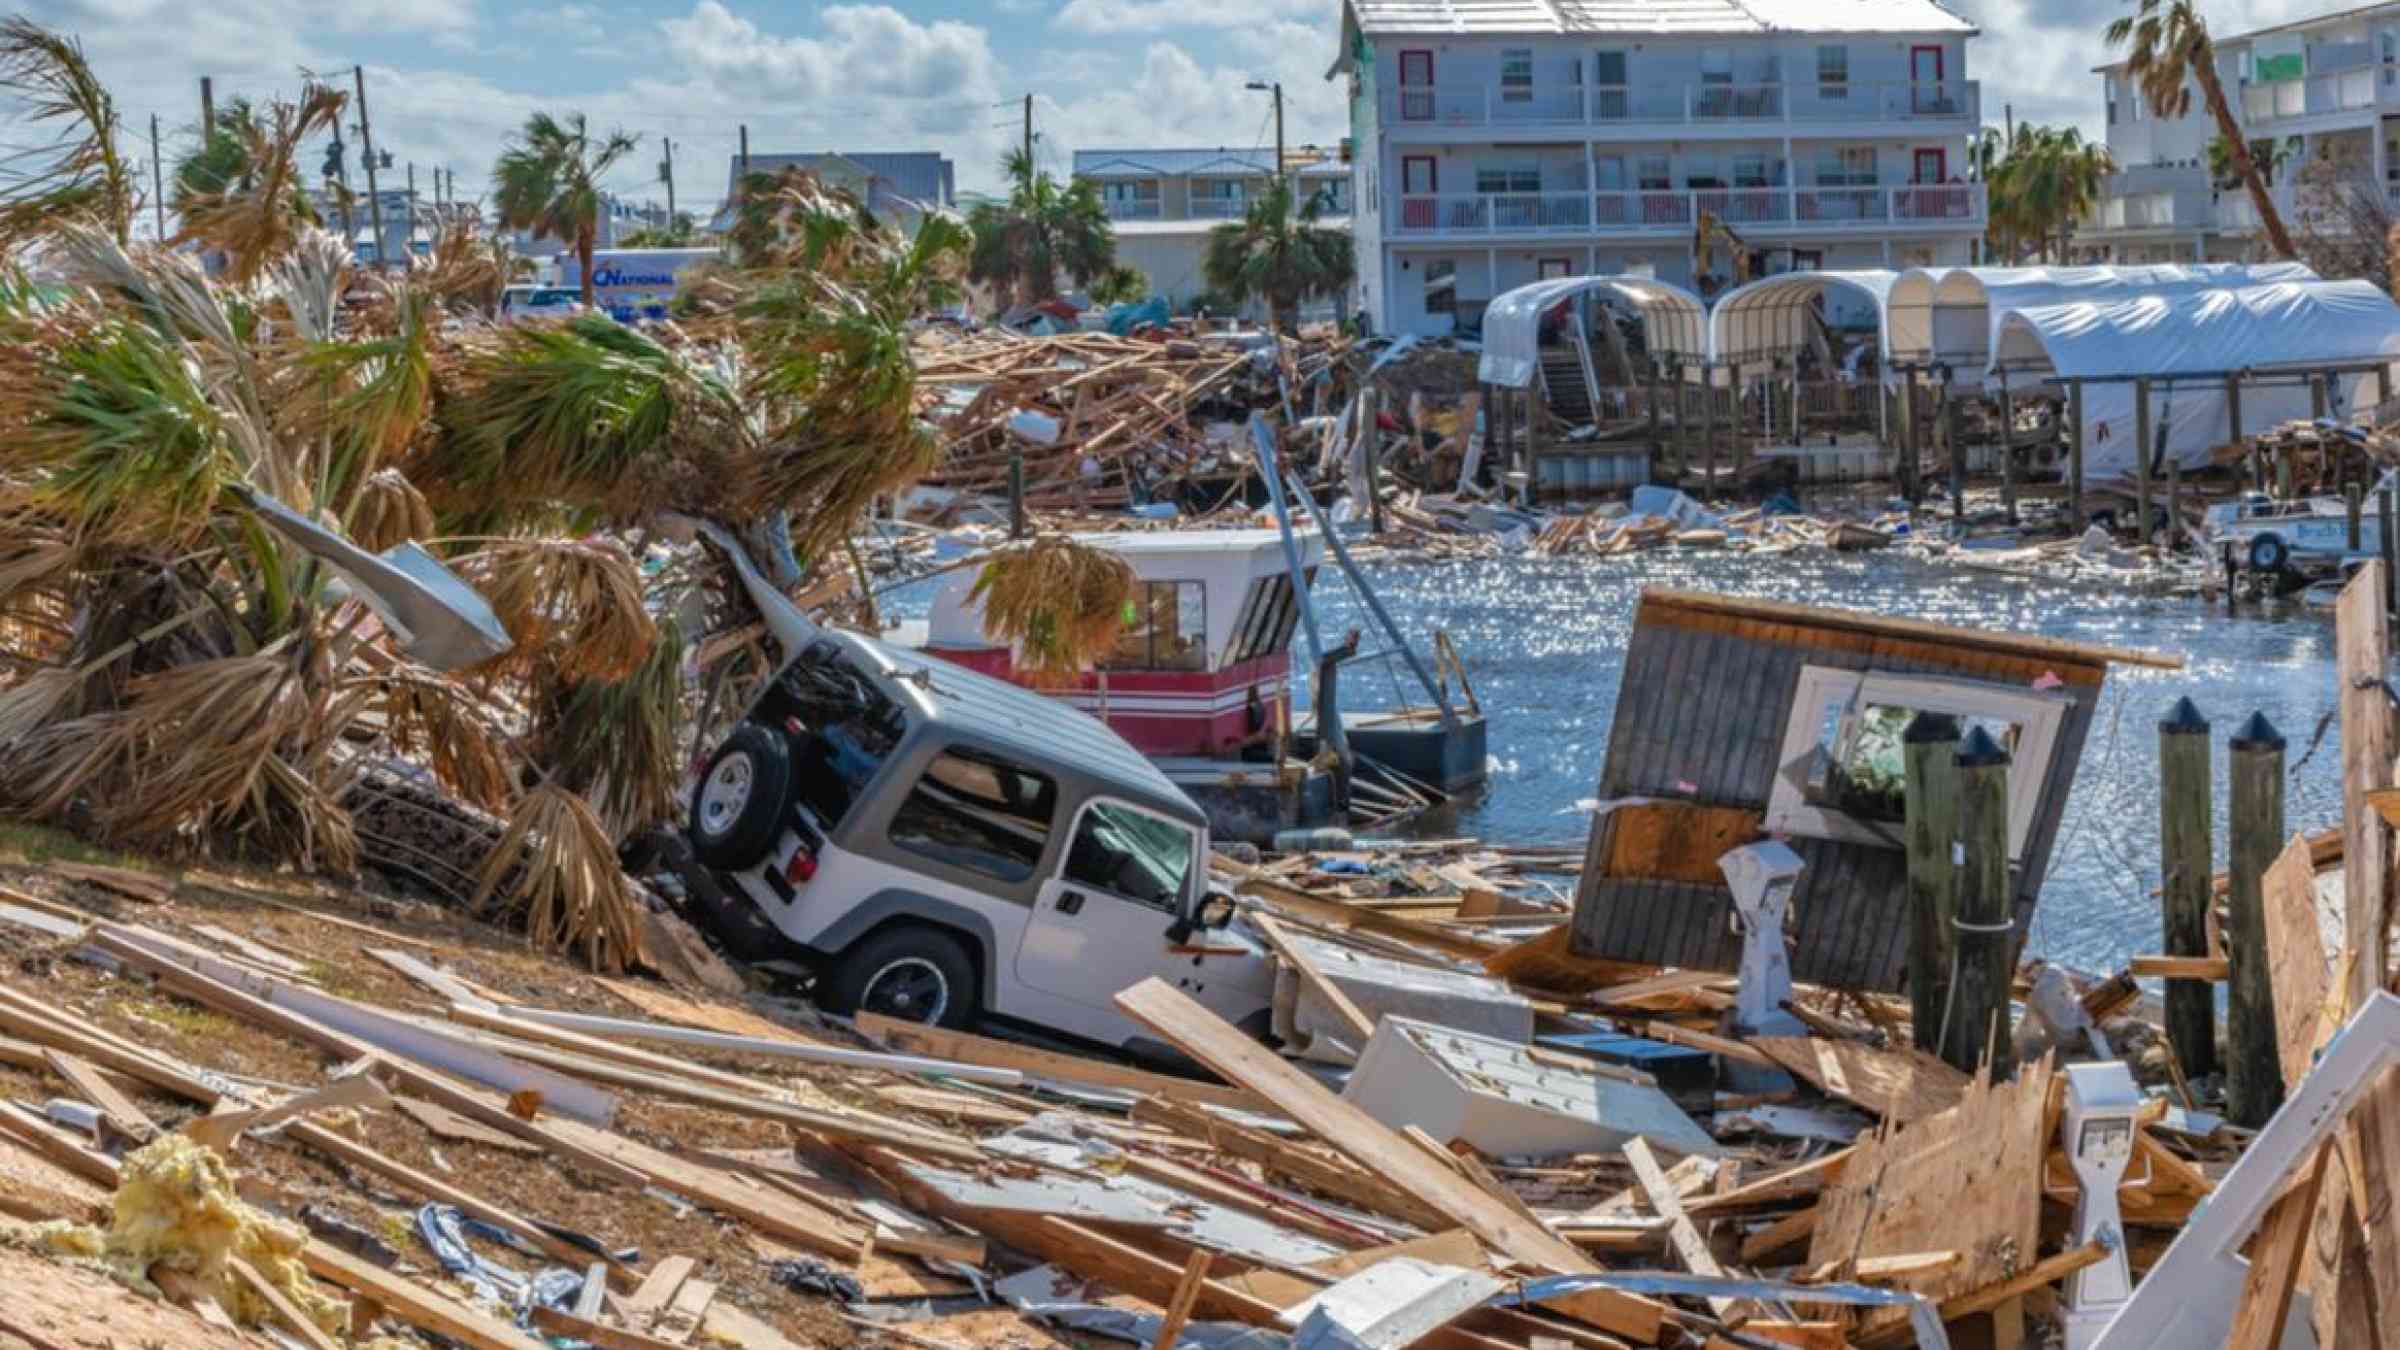 The impact of Hurricane Michael in the US, 2018. Terry Kelly/Shutterstock